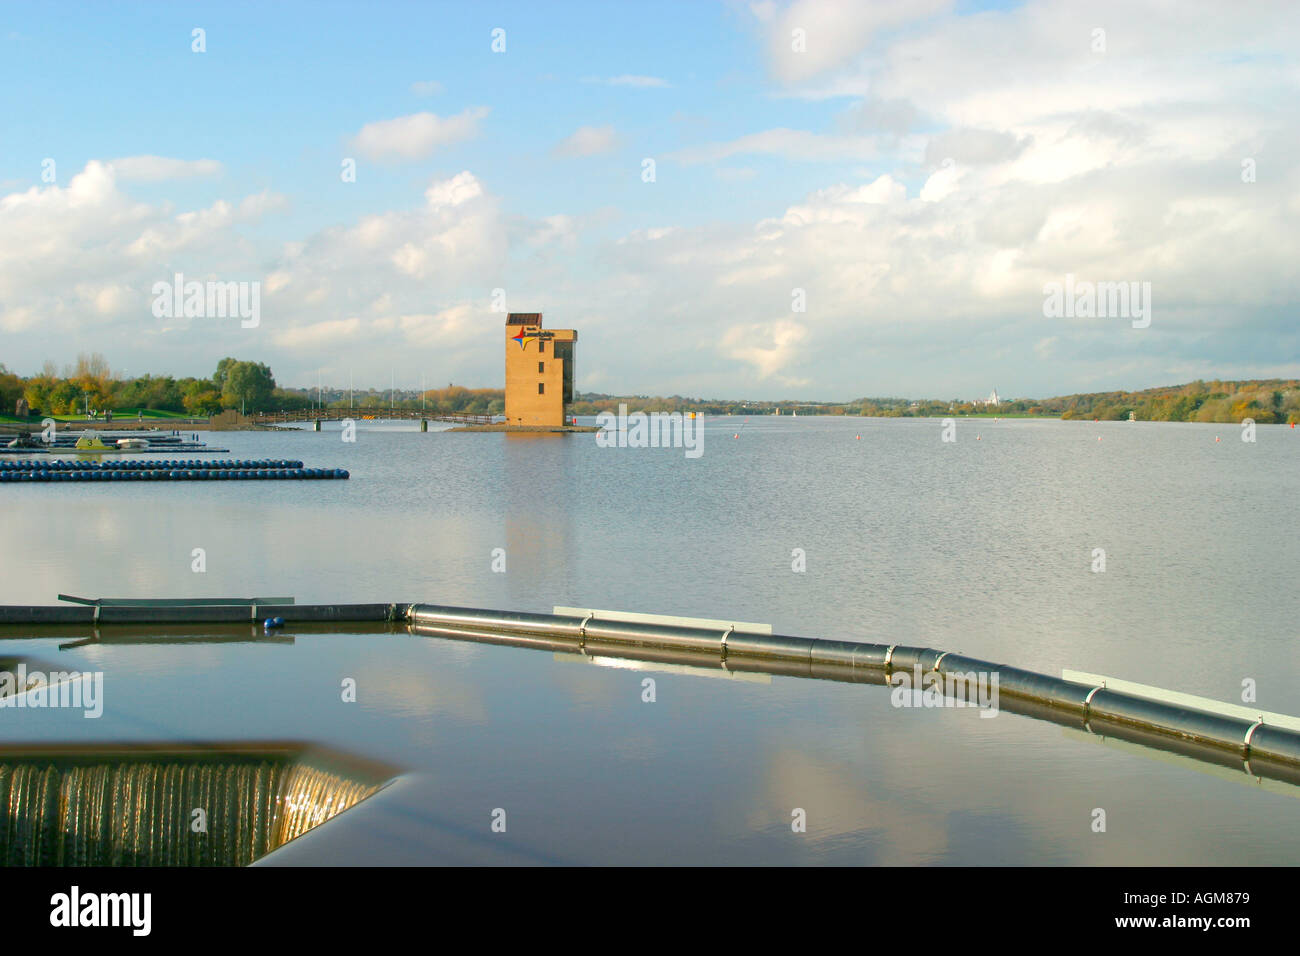 National Rowing Centre Strathclyde Park Motherwell Scotland Stock Photo